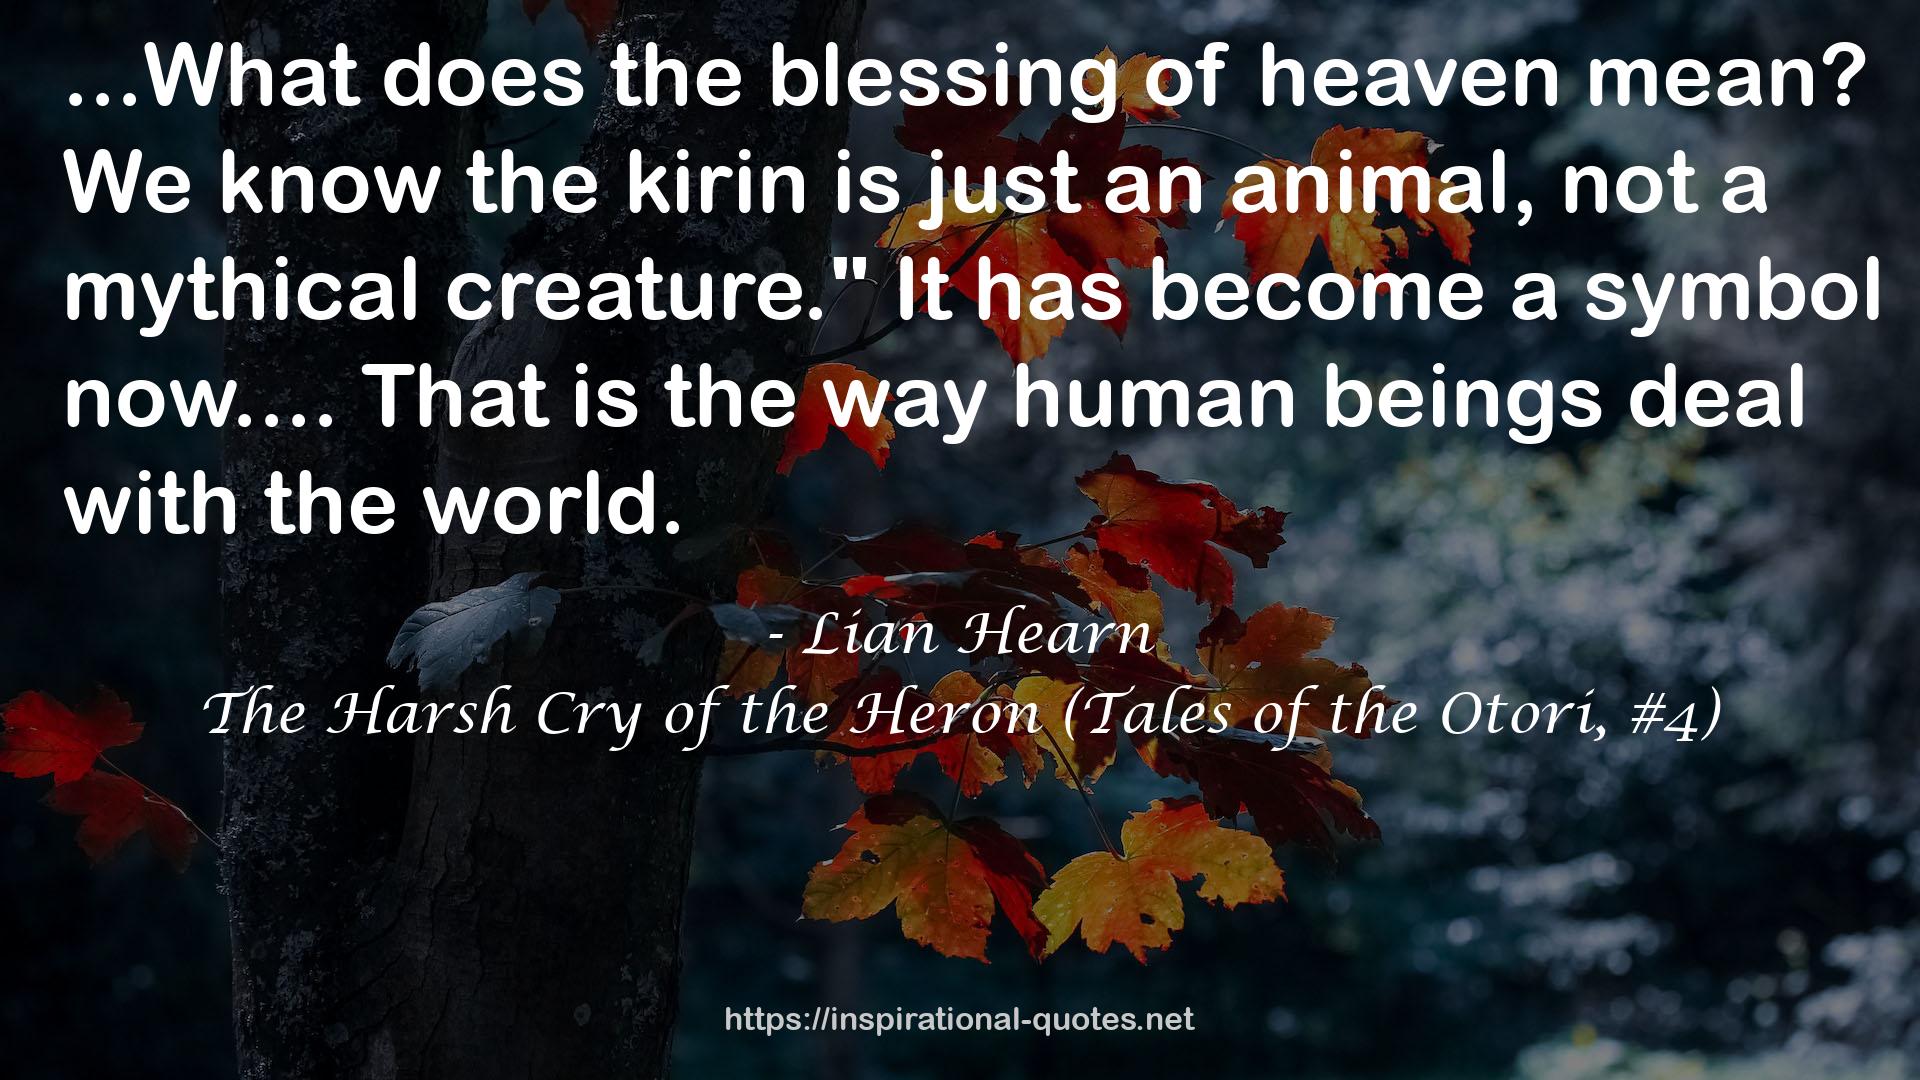 The Harsh Cry of the Heron (Tales of the Otori, #4) QUOTES